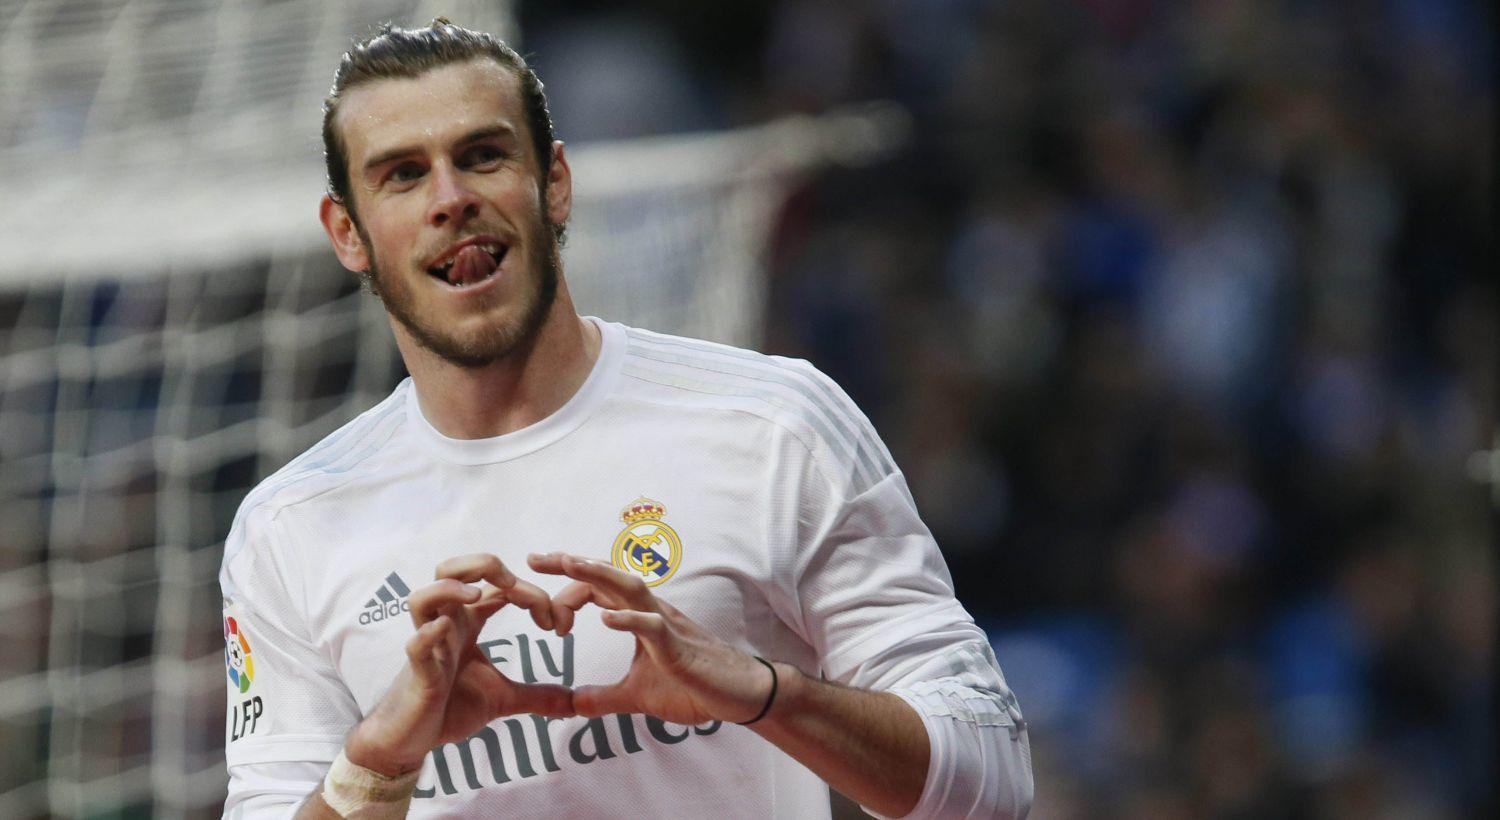 Bale Real Madrid Bale to stay at Real Madrid and new signing Lunin was also presented